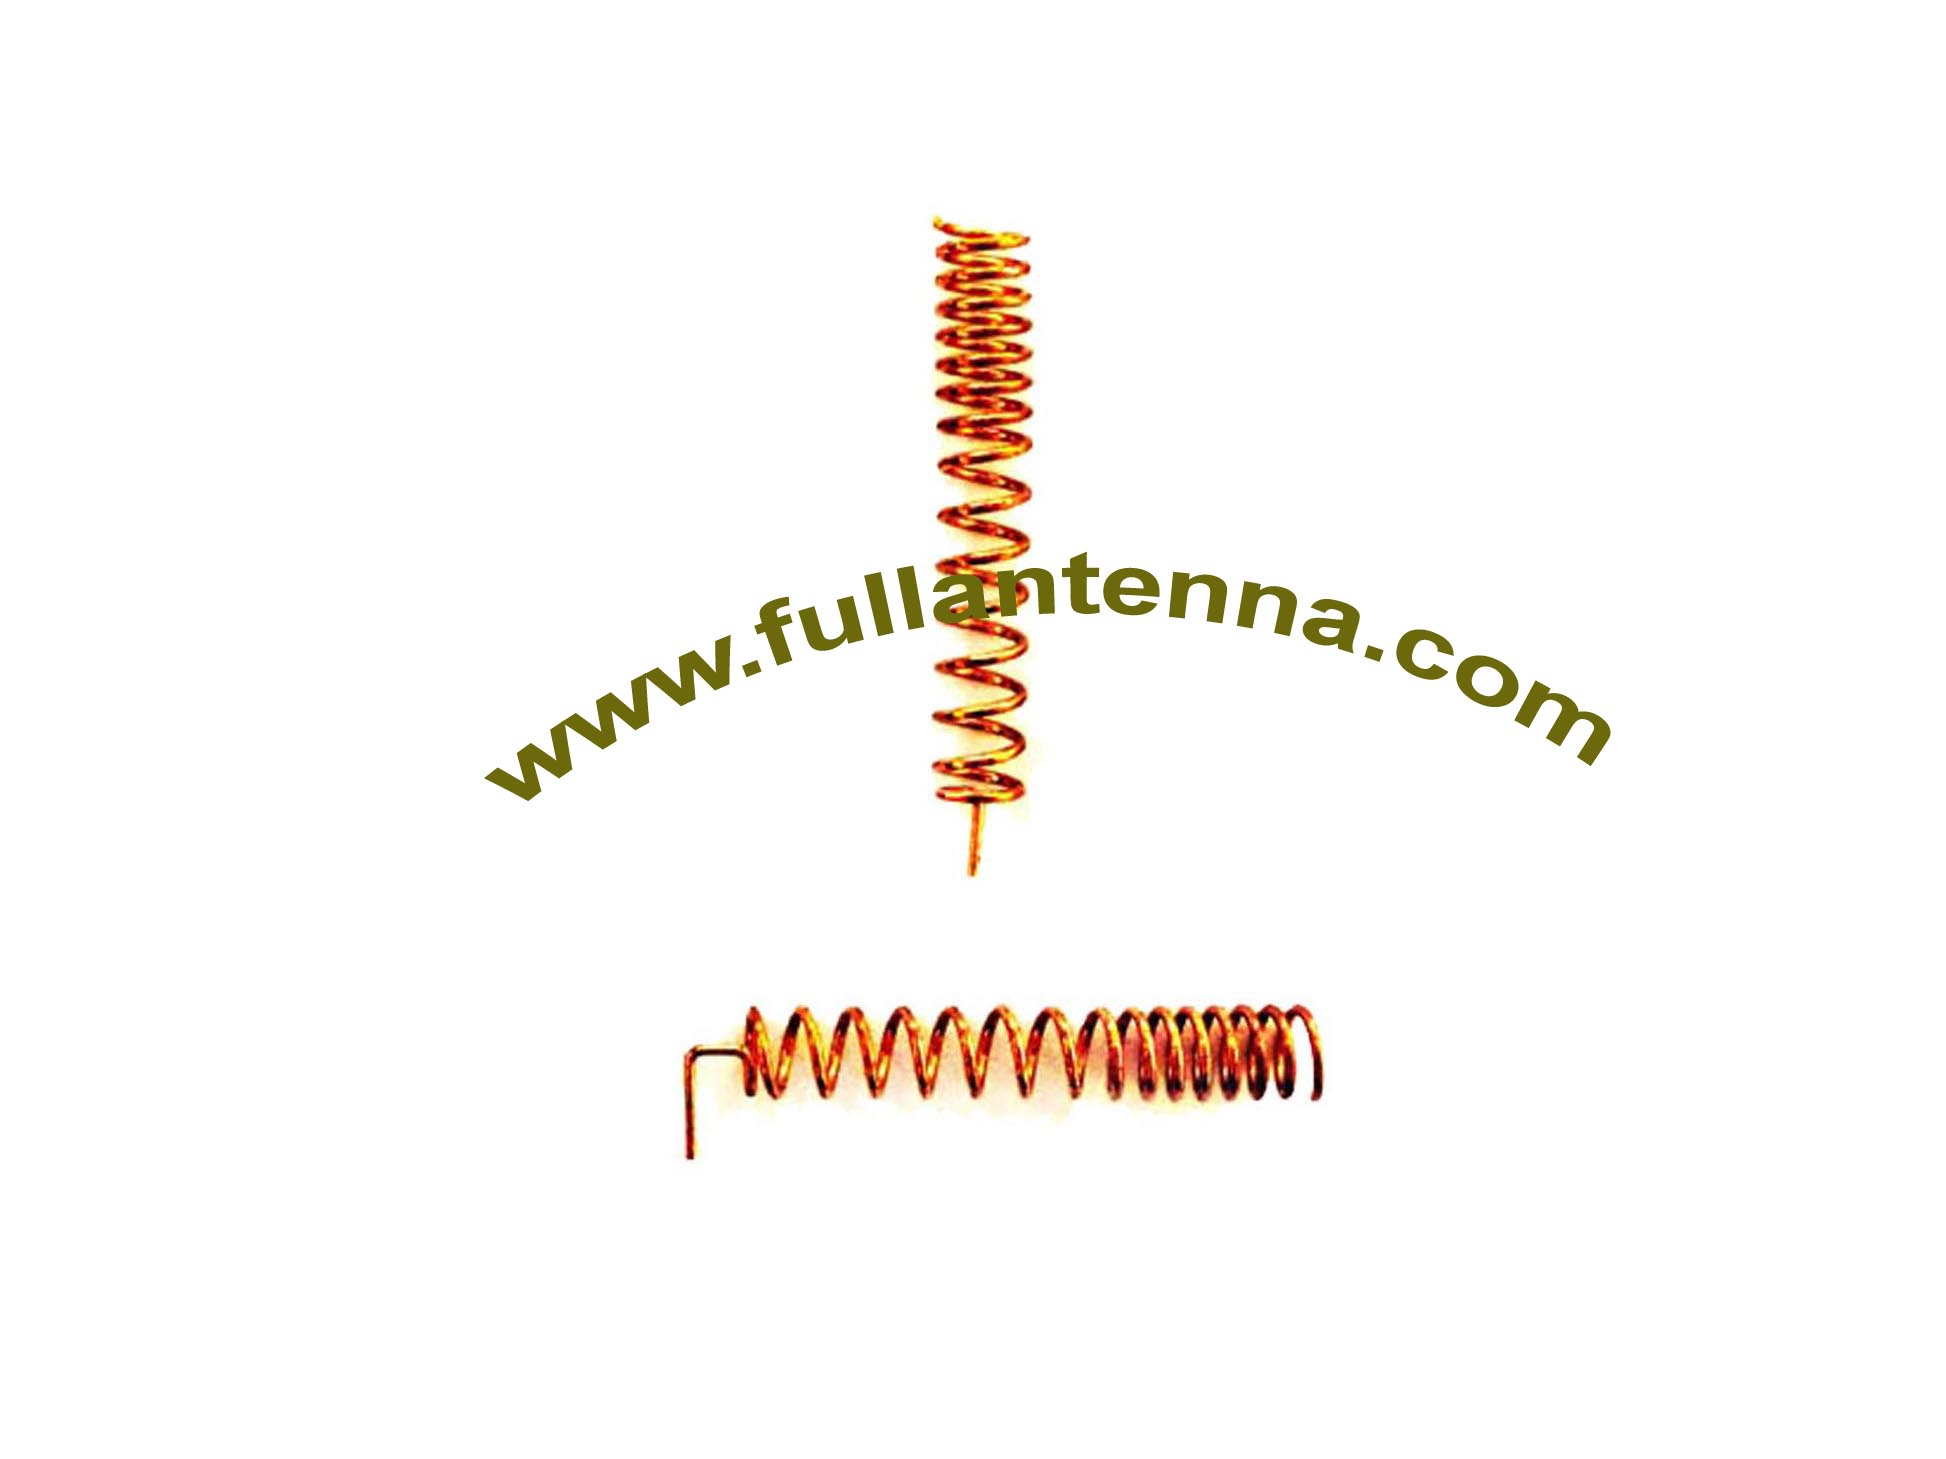 P/N:FA915.Spring,915Mhz Antenna,spring built in antenna small size